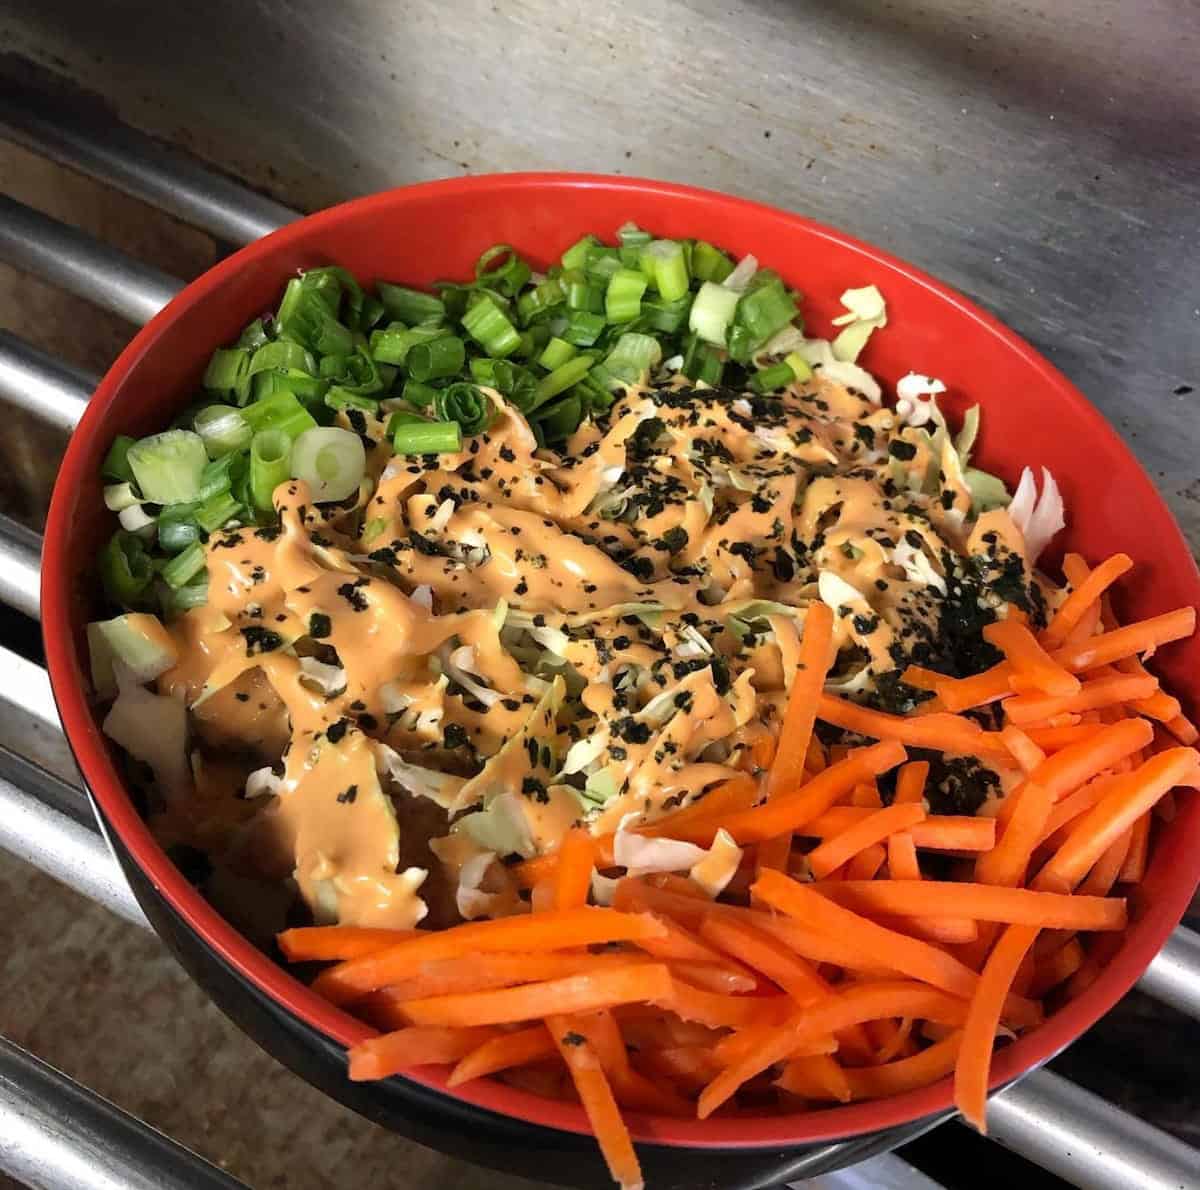 A vegan offering from The Native Bowl in Portland.